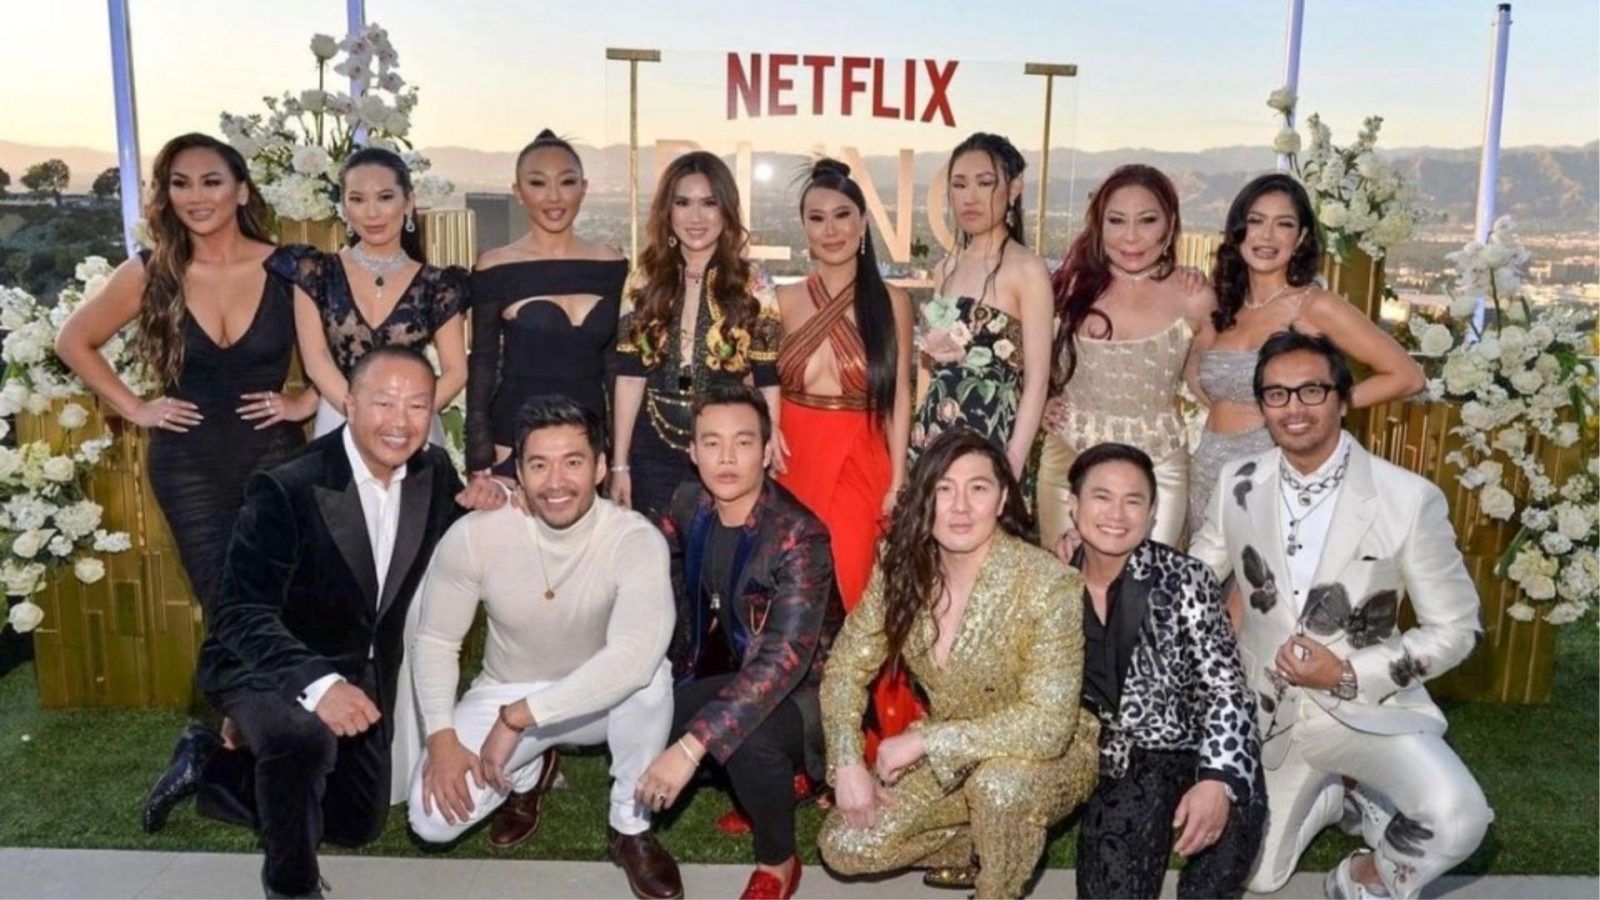 Dorothy Wang talks confirmed ‘Bling Empire’ season 3 and possible NYC-based spin-off